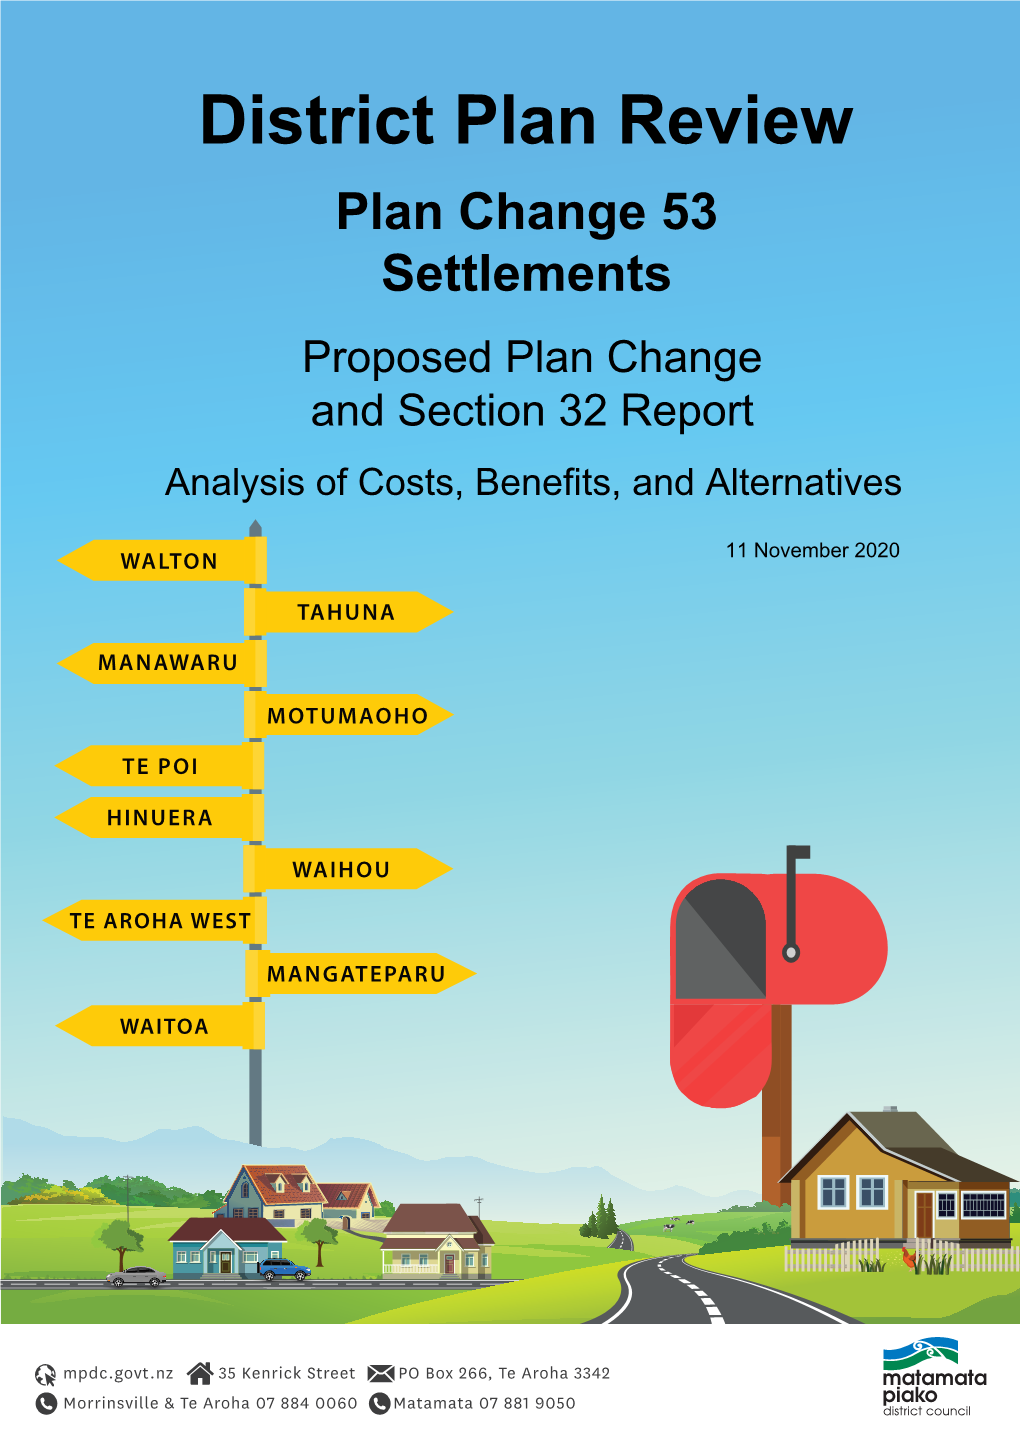 Section 32 Report Analysis of Costs, Benefits, and Alternatives